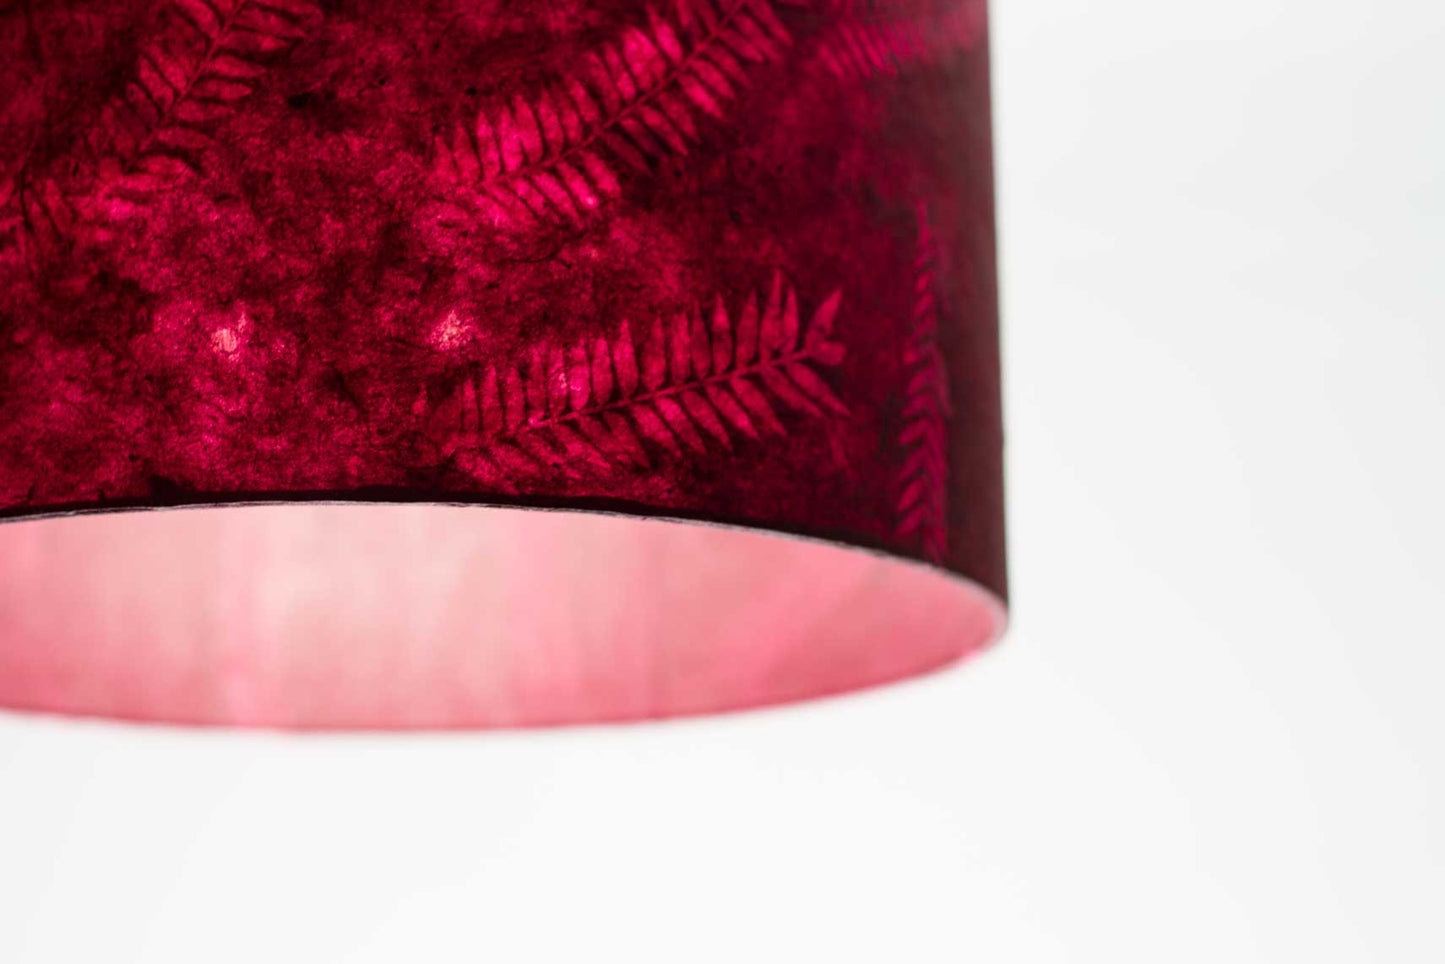 Oval Lamp Shade - P25 - Resistance Dyed Pink Fern, 40cm(w) x 20cm(h) x 30cm(d)